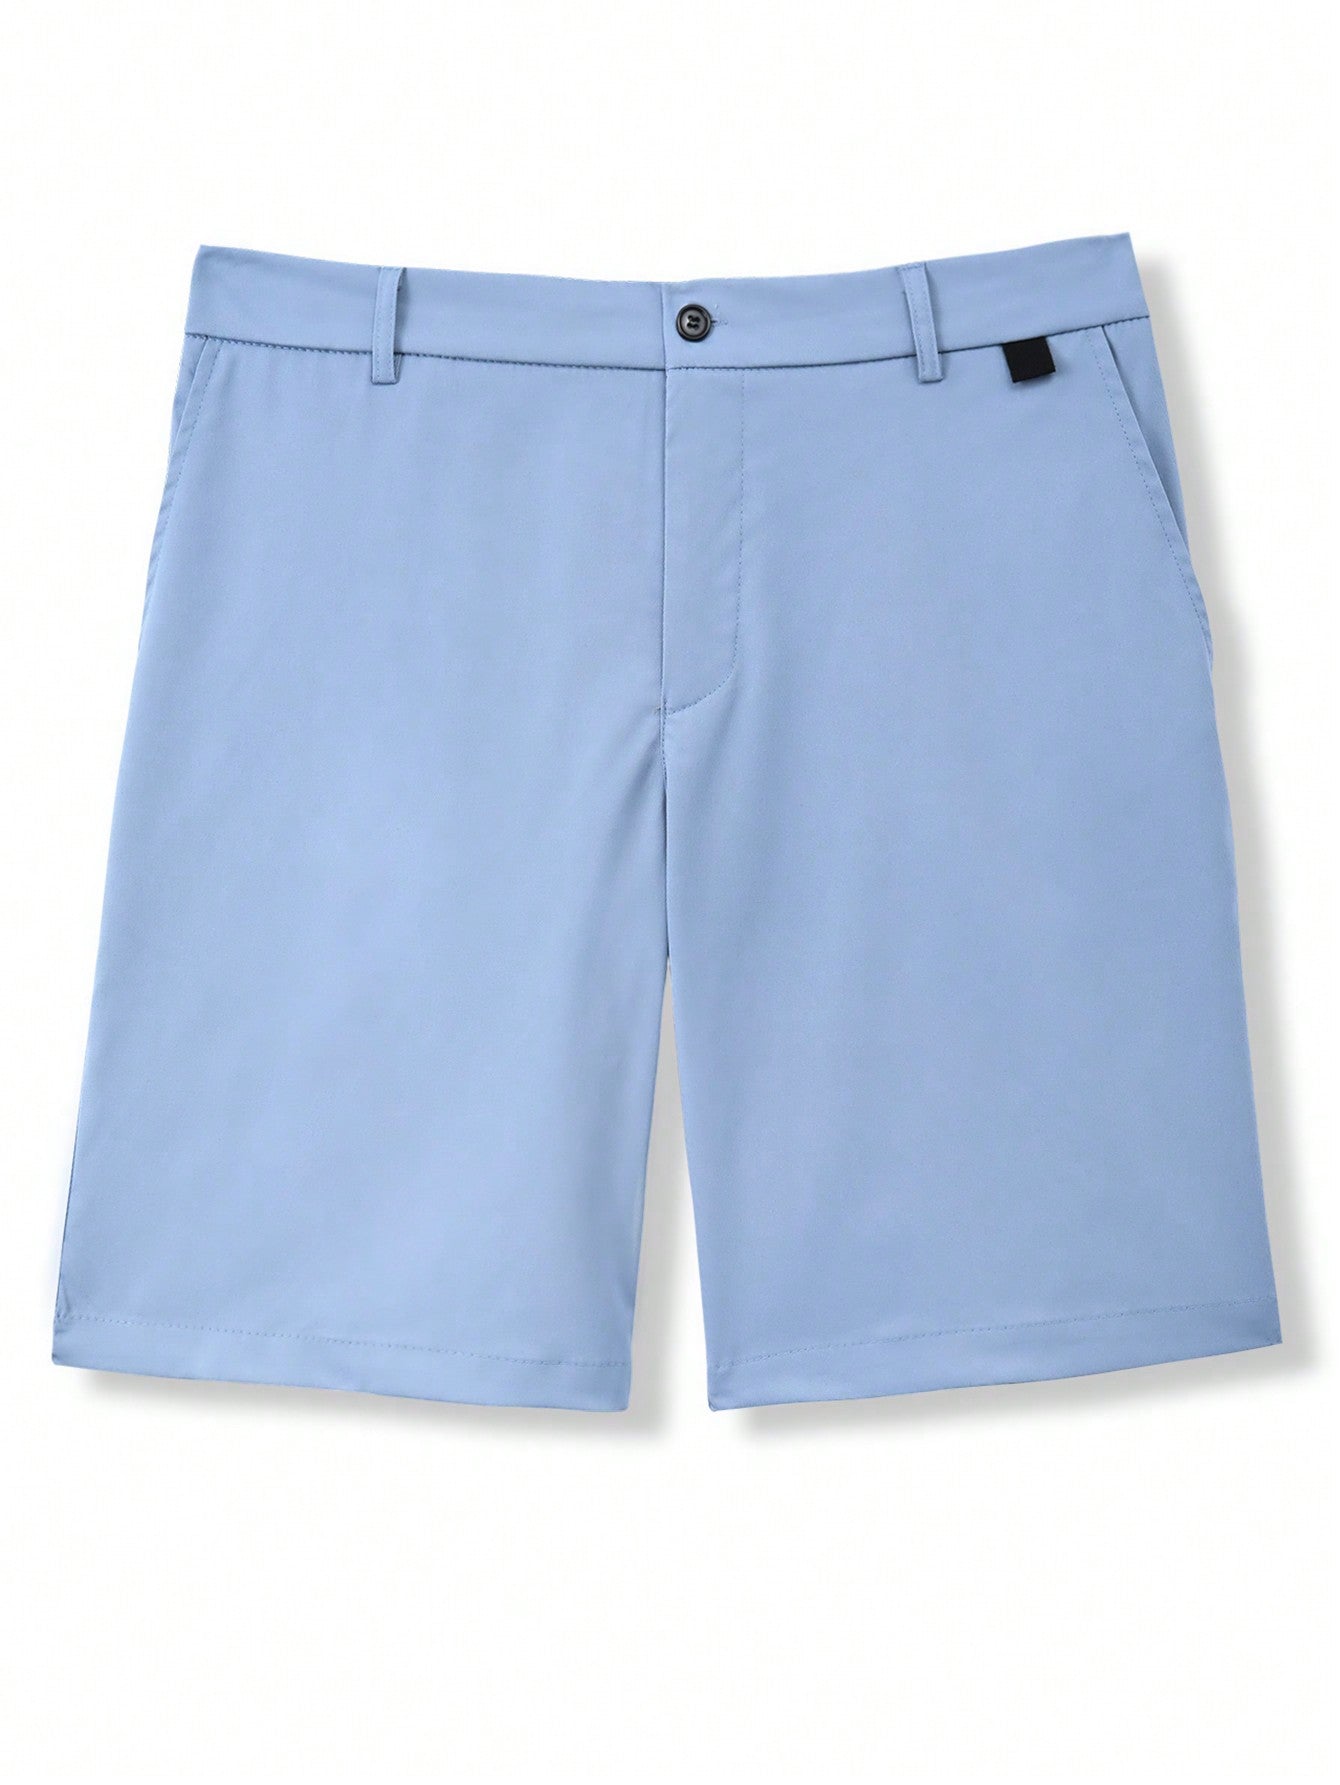 Men's Casual Bermuda Shorts with Pockets - Solid Color, Zipper Fly, Regular Fit